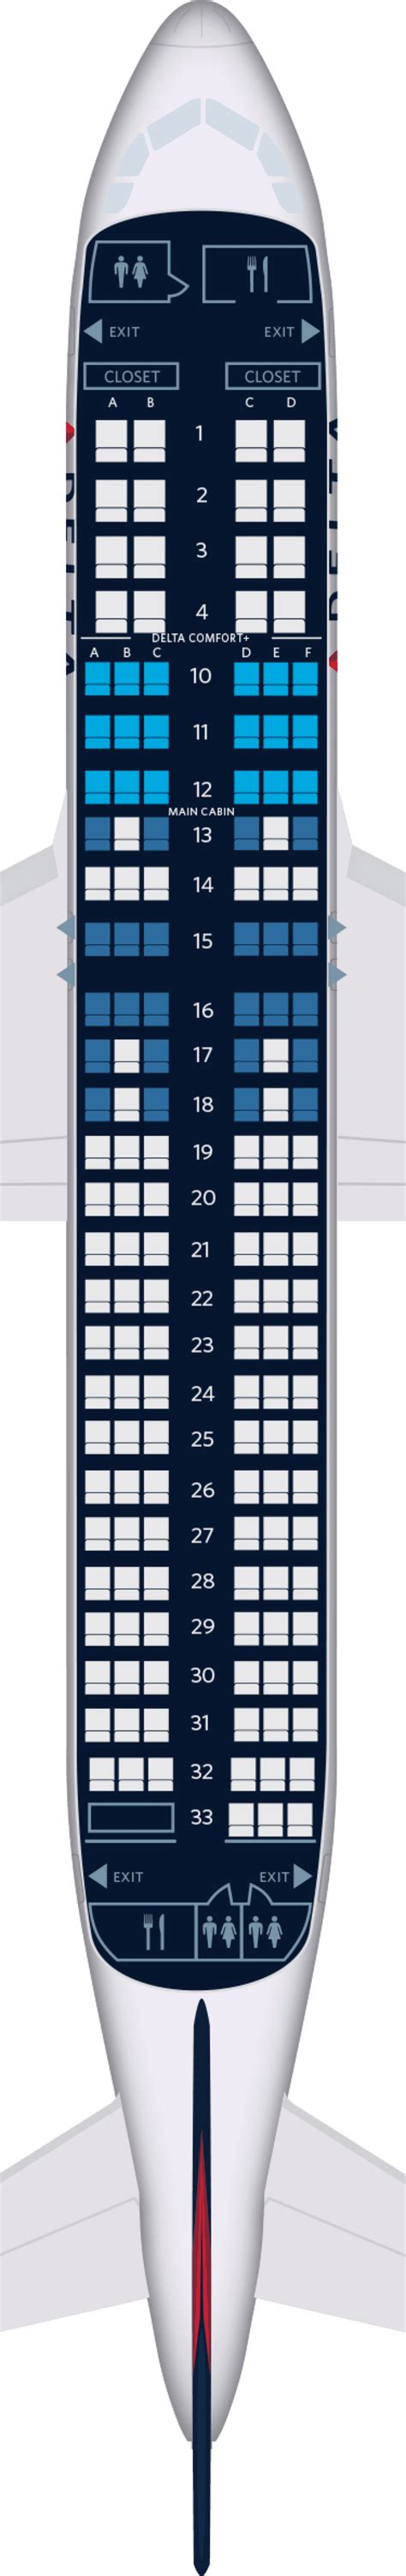 This version of the A320 is basically a higher capacity, more cramped version of the 32R aircraft, as a monument (galley/lavatory area) reconfiguration allows the addition of four first class seats and 6 economy class seats (18 Delta Comfort seats consistent across the versions).. 